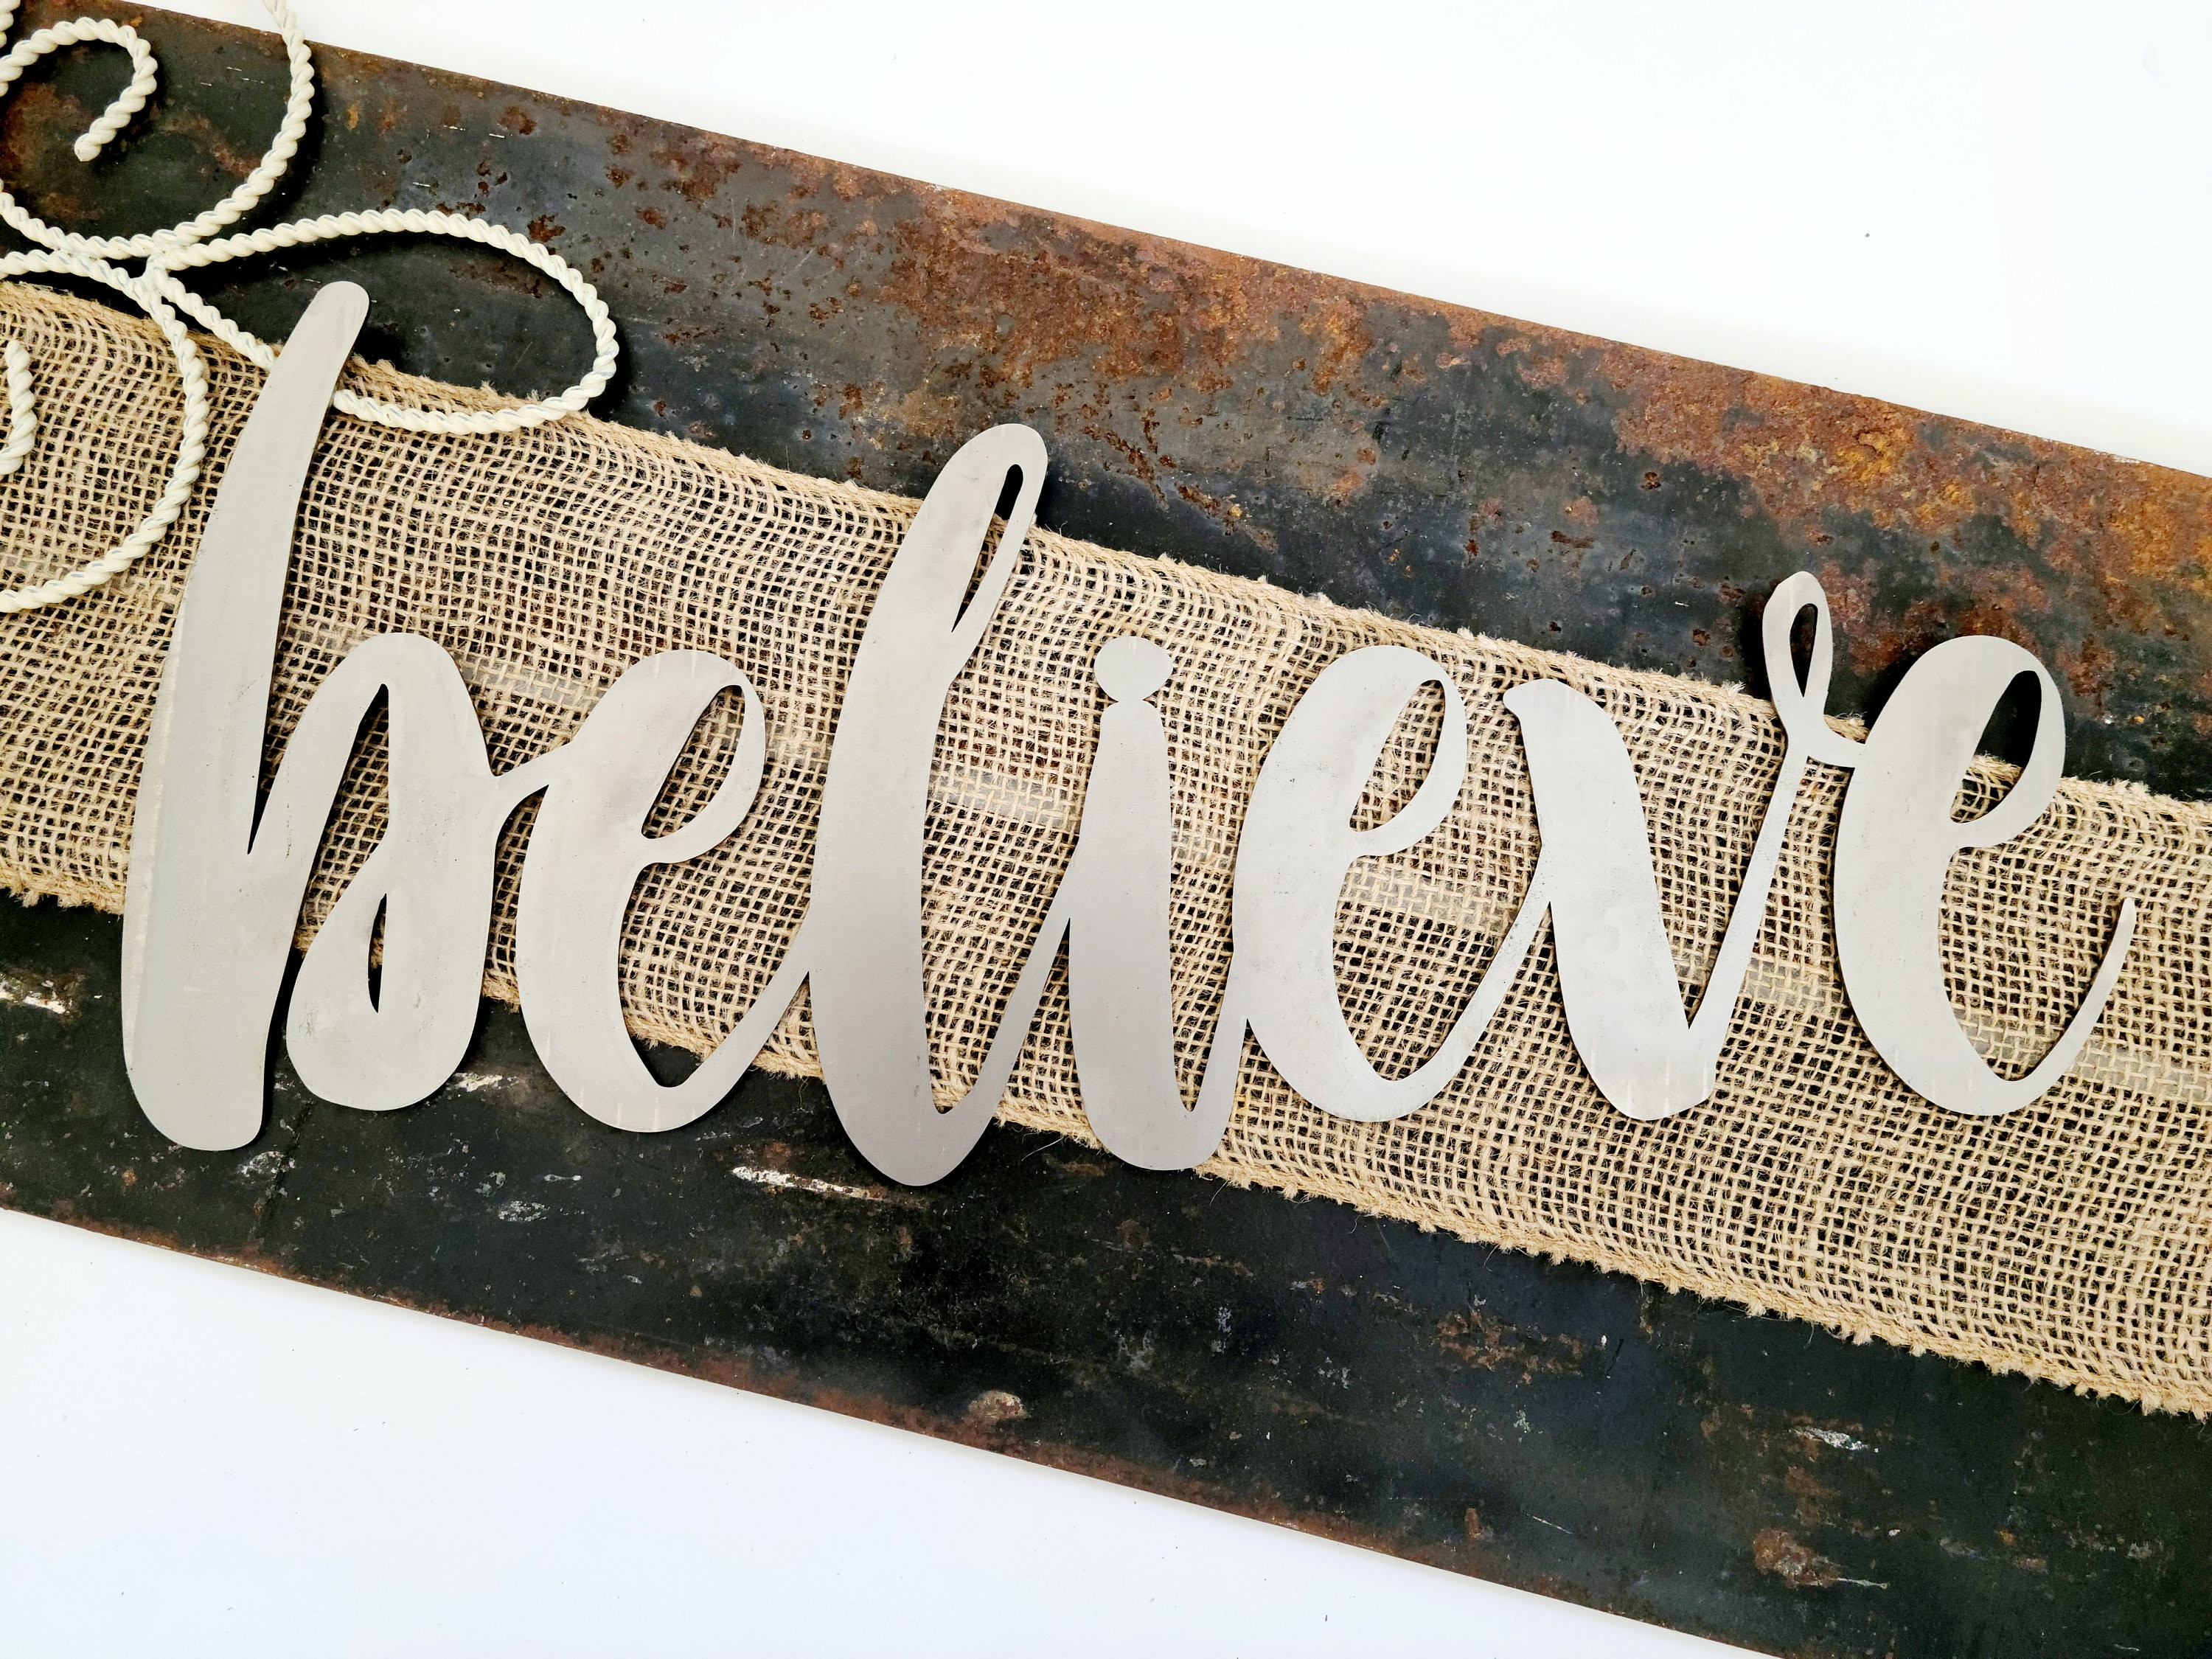 Just The Two Of Us Decorative Wall Sign – Sticks and Steel